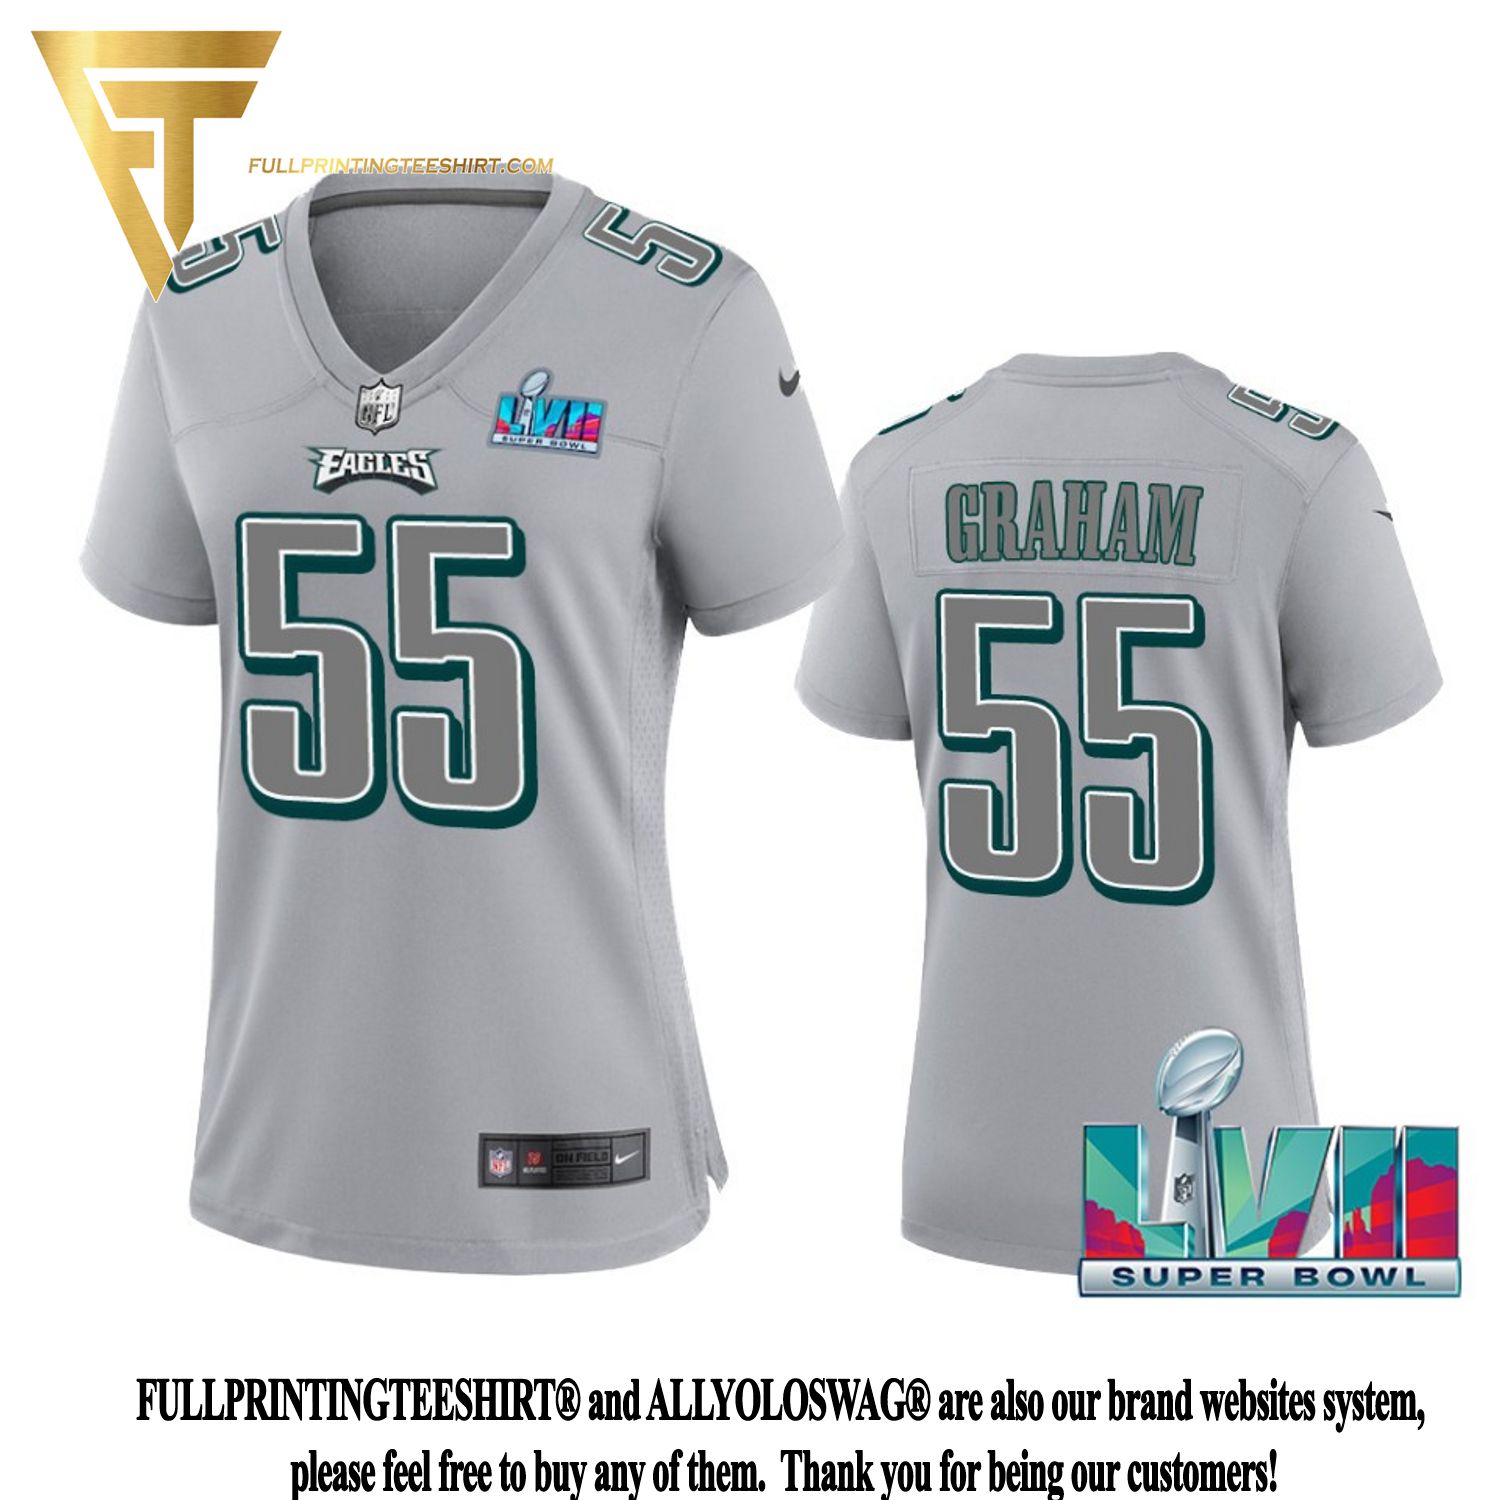 eagles 55 jersey